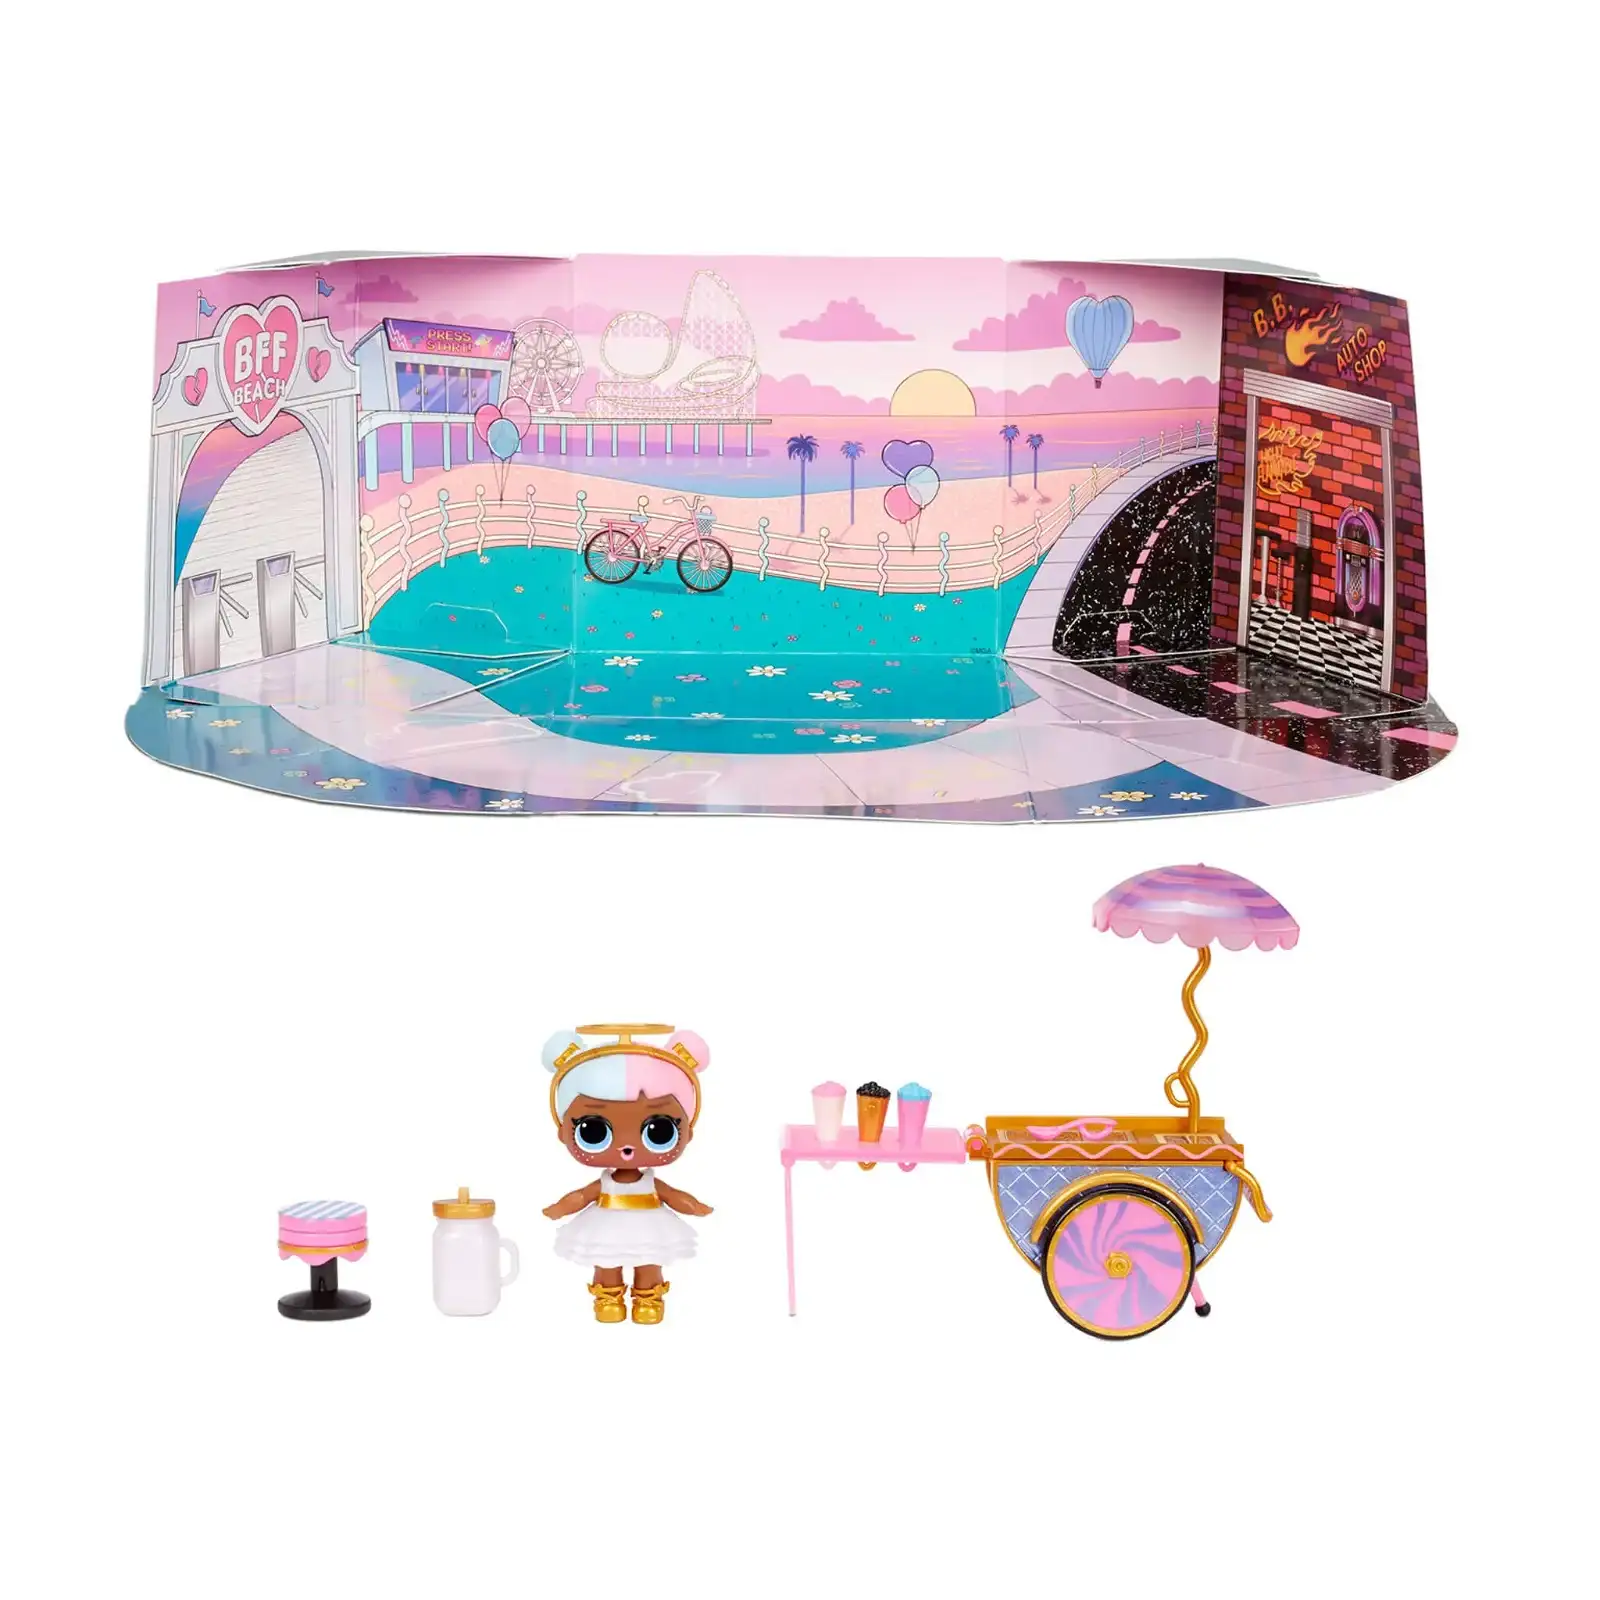 Image of LOL Surprise Furniture Sweet Boardwalk with Sugar Doll and 10+ Surprises